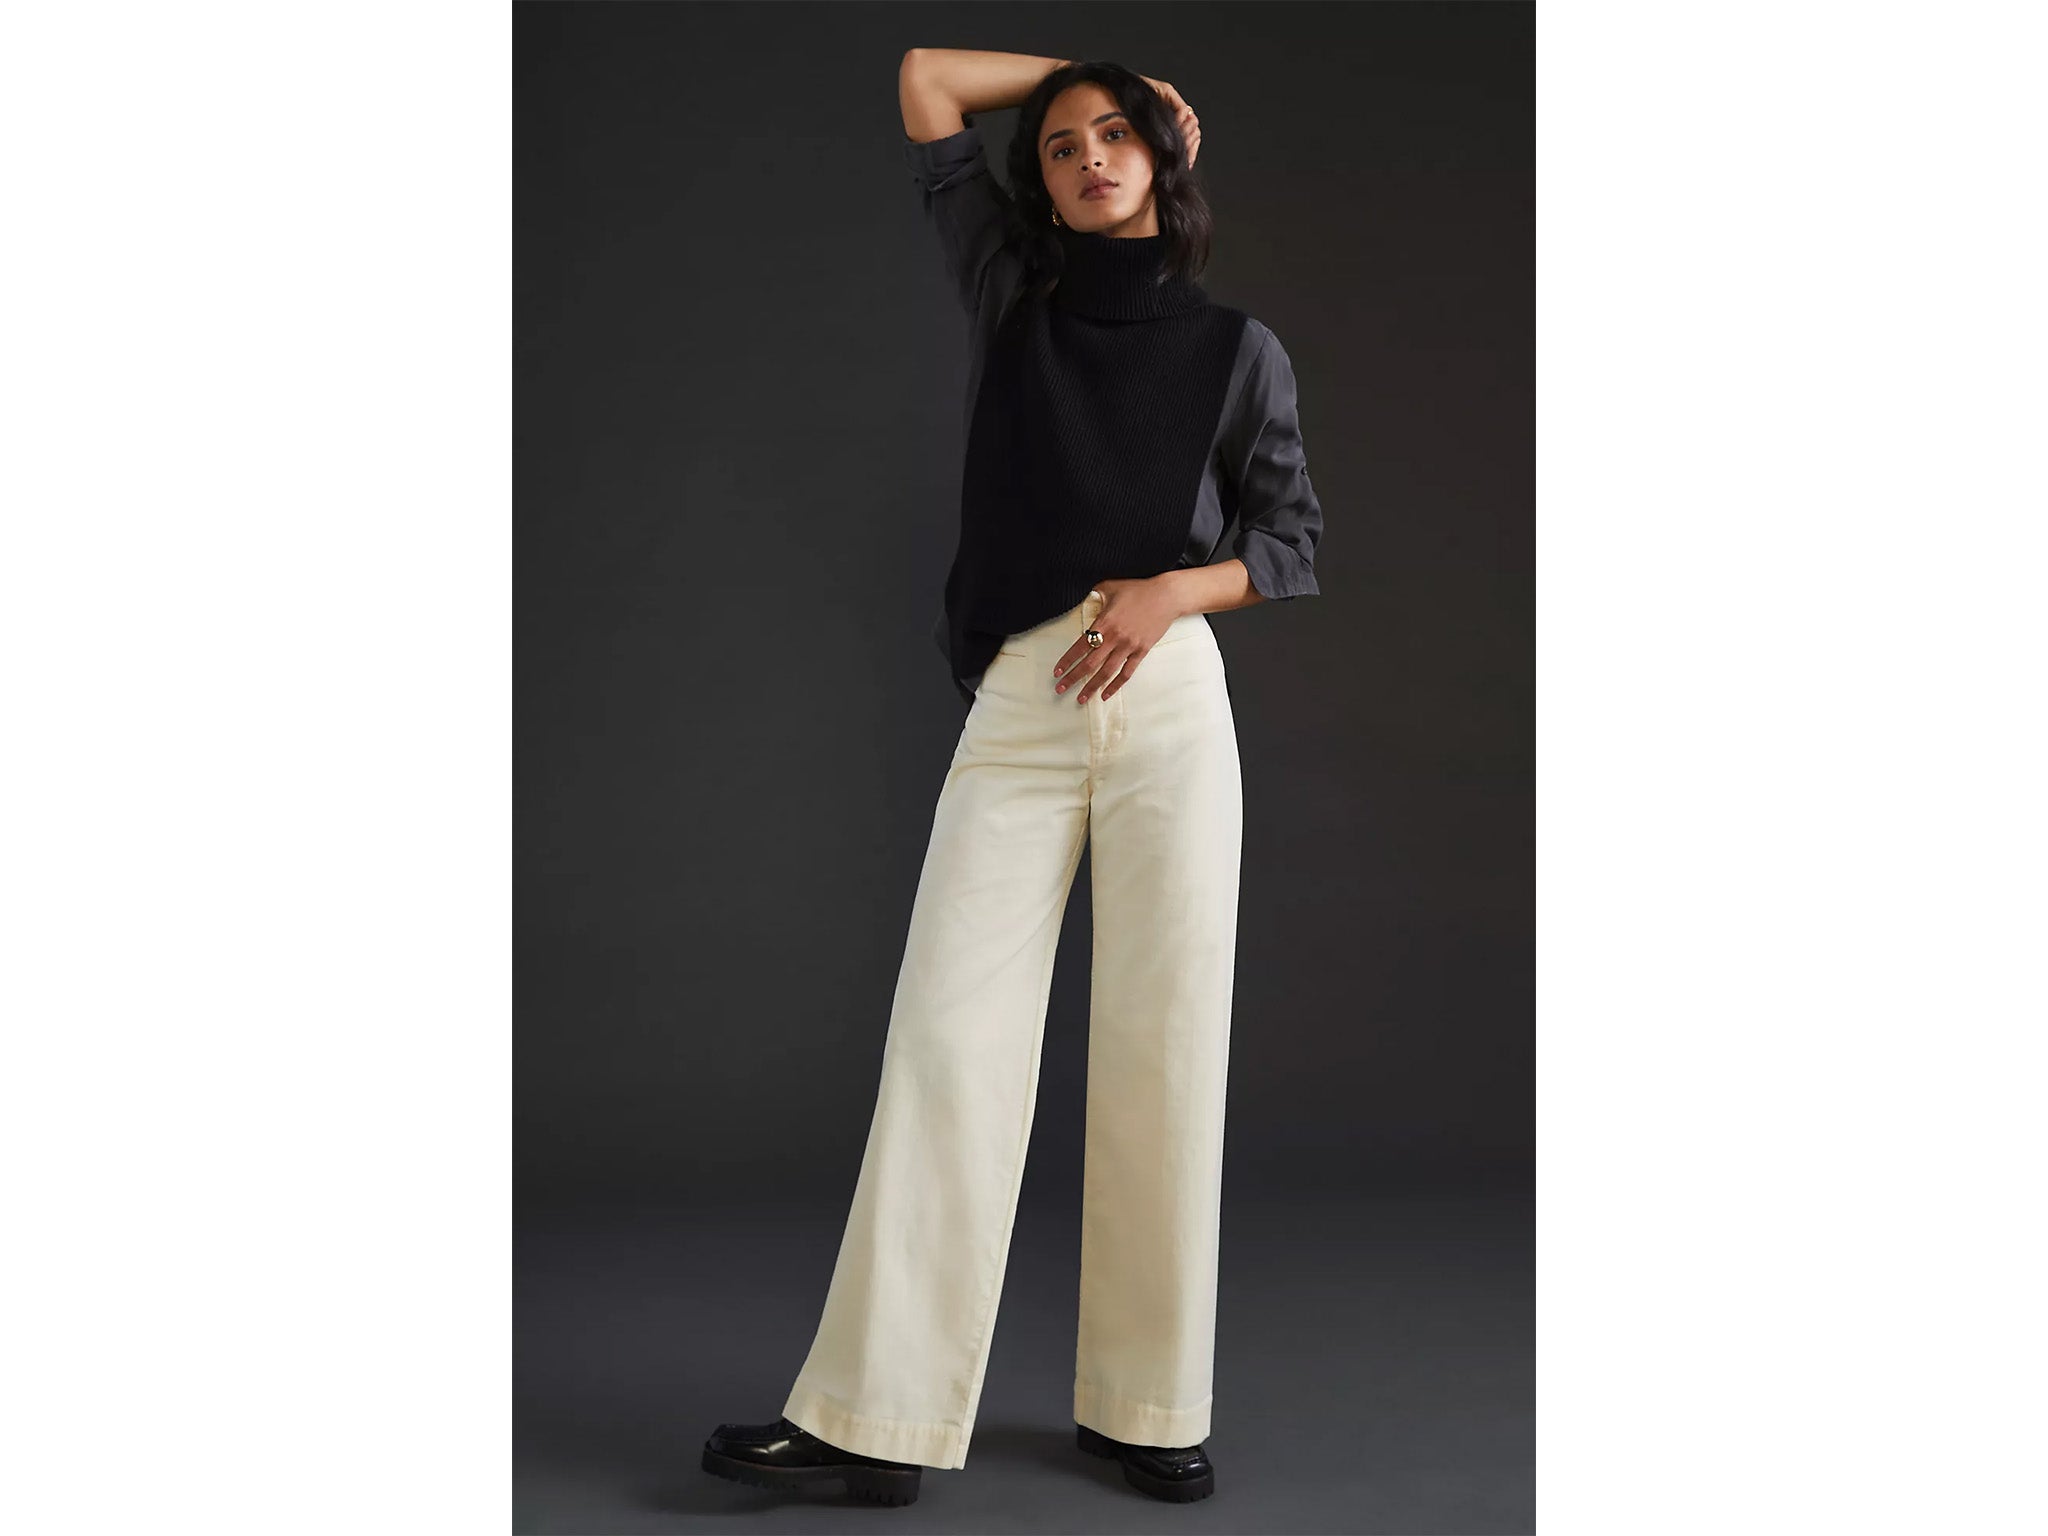 Anthropologie%20Maeve%20colette%20corduroy%20wide leg%20trousers